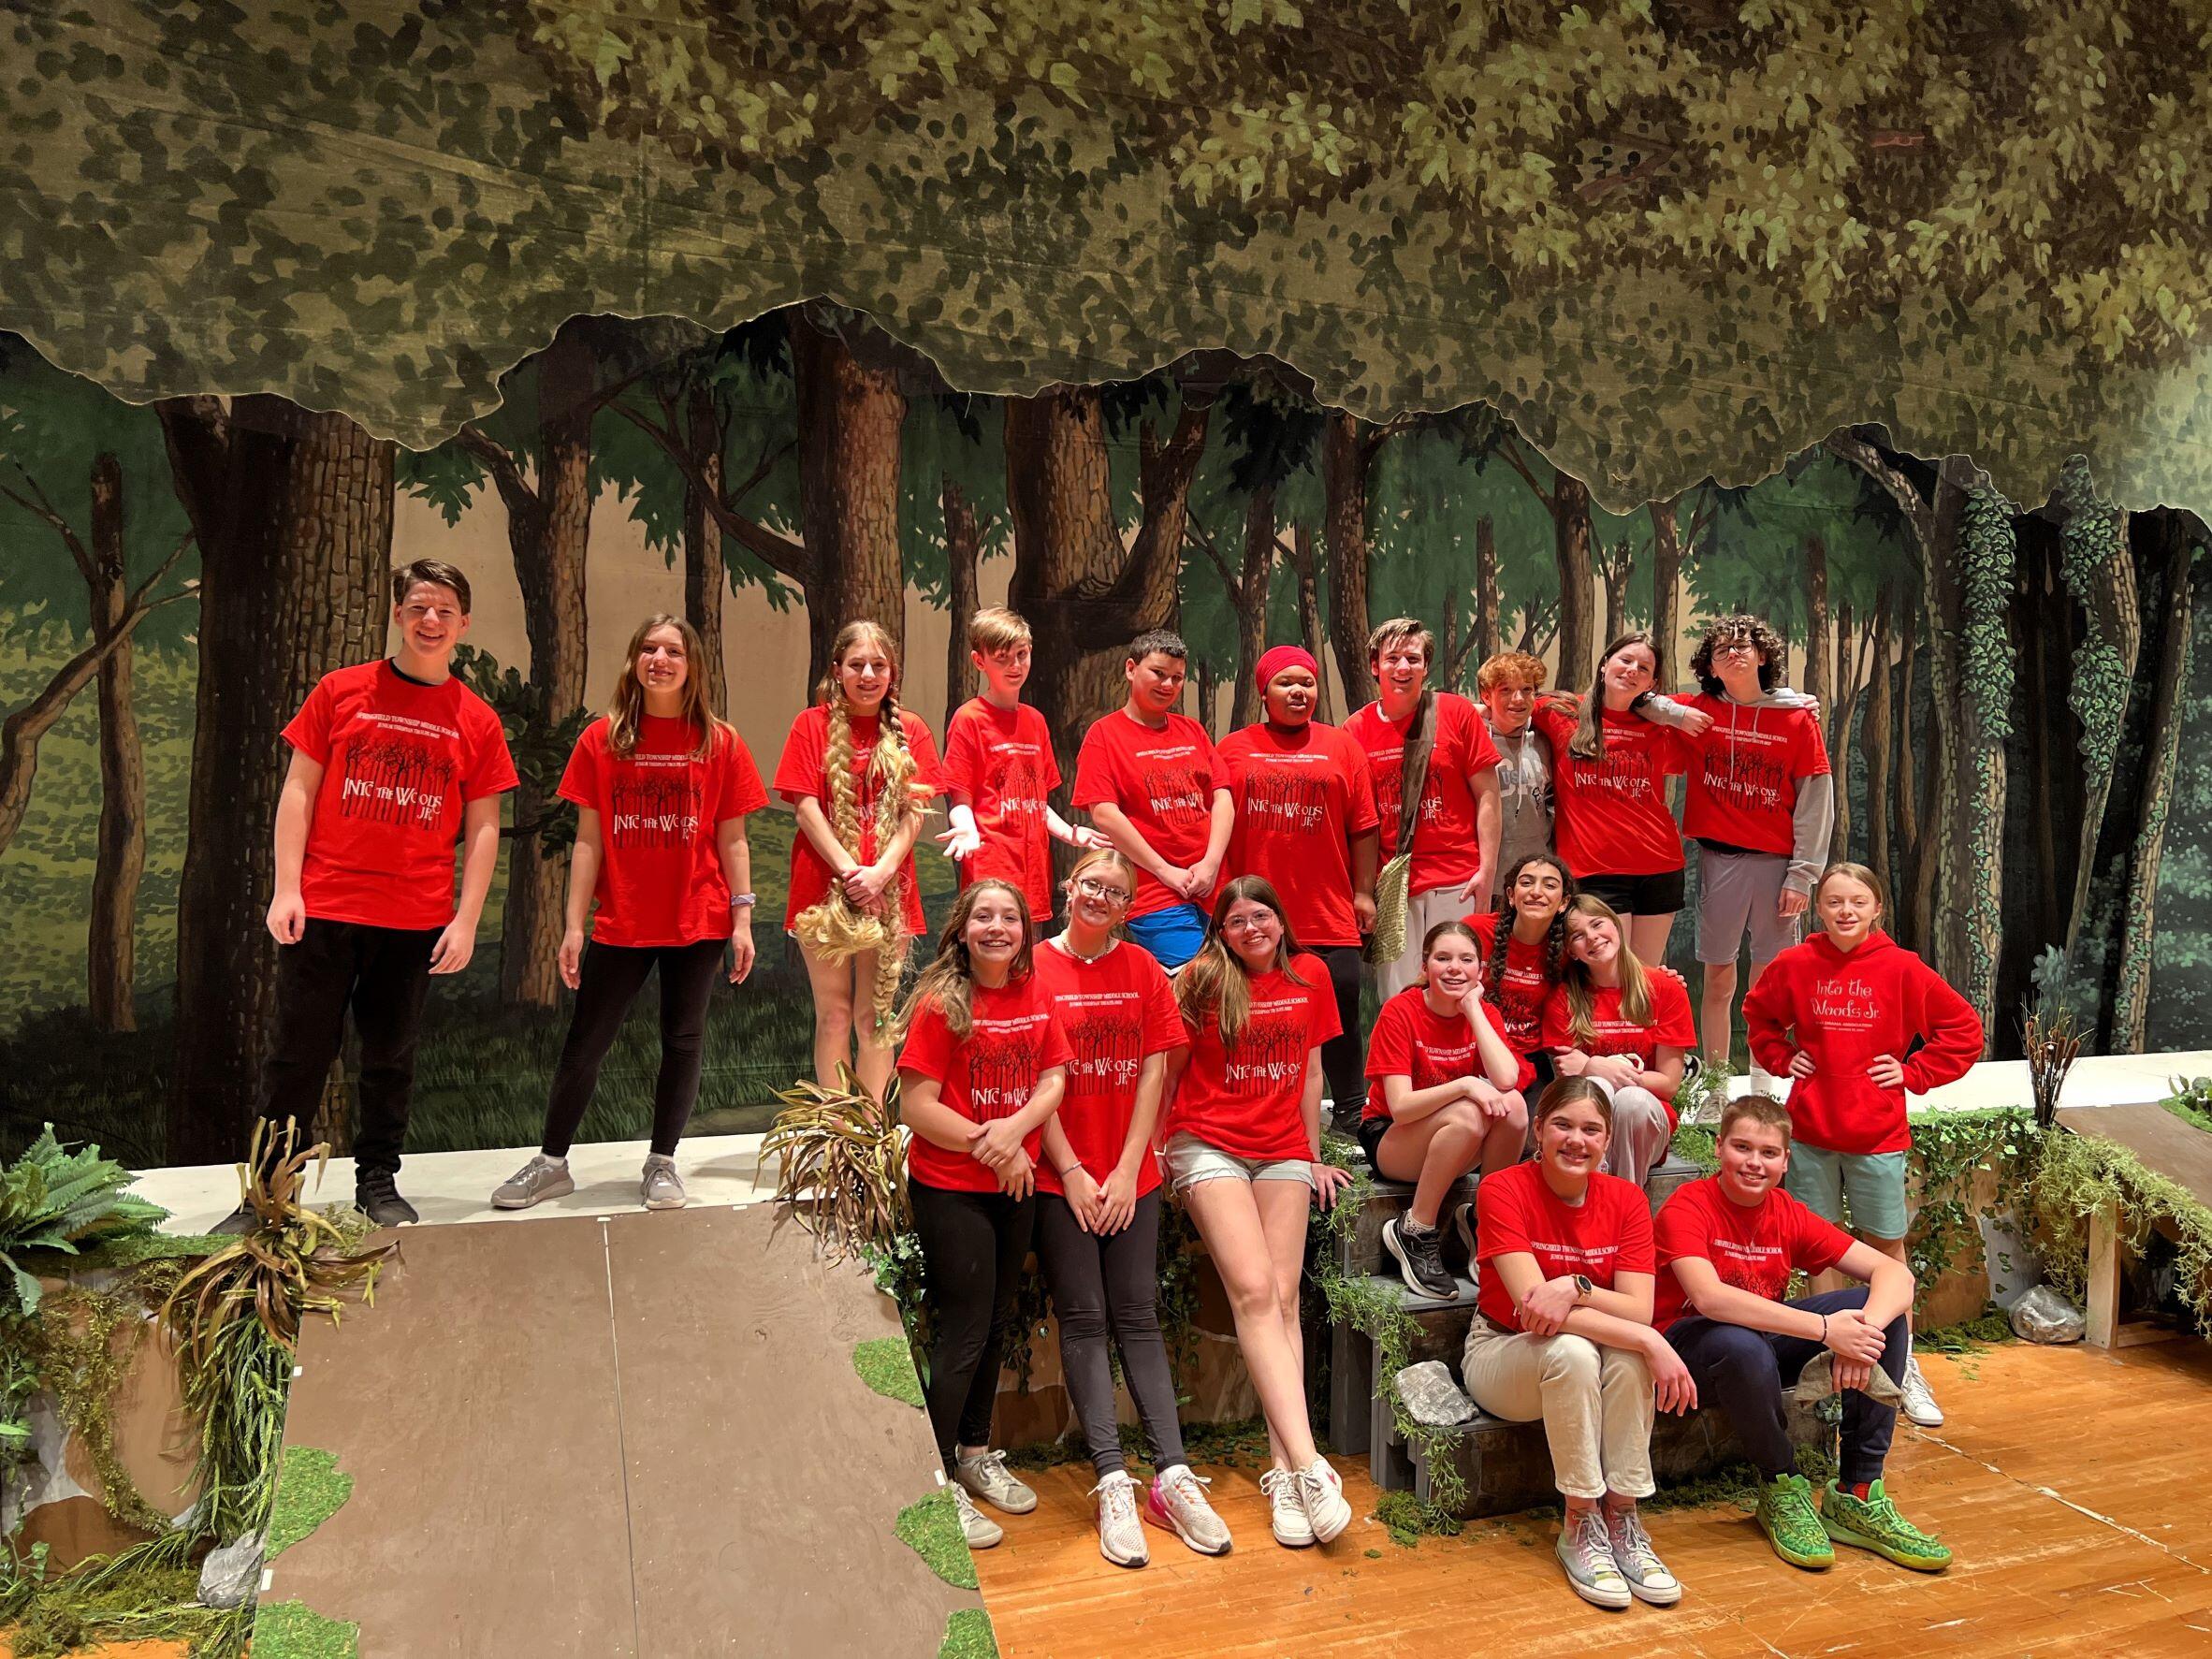 cast of school play, grouped for a photo. All students are wearing red shirts with the play's title, "Into the Woods"